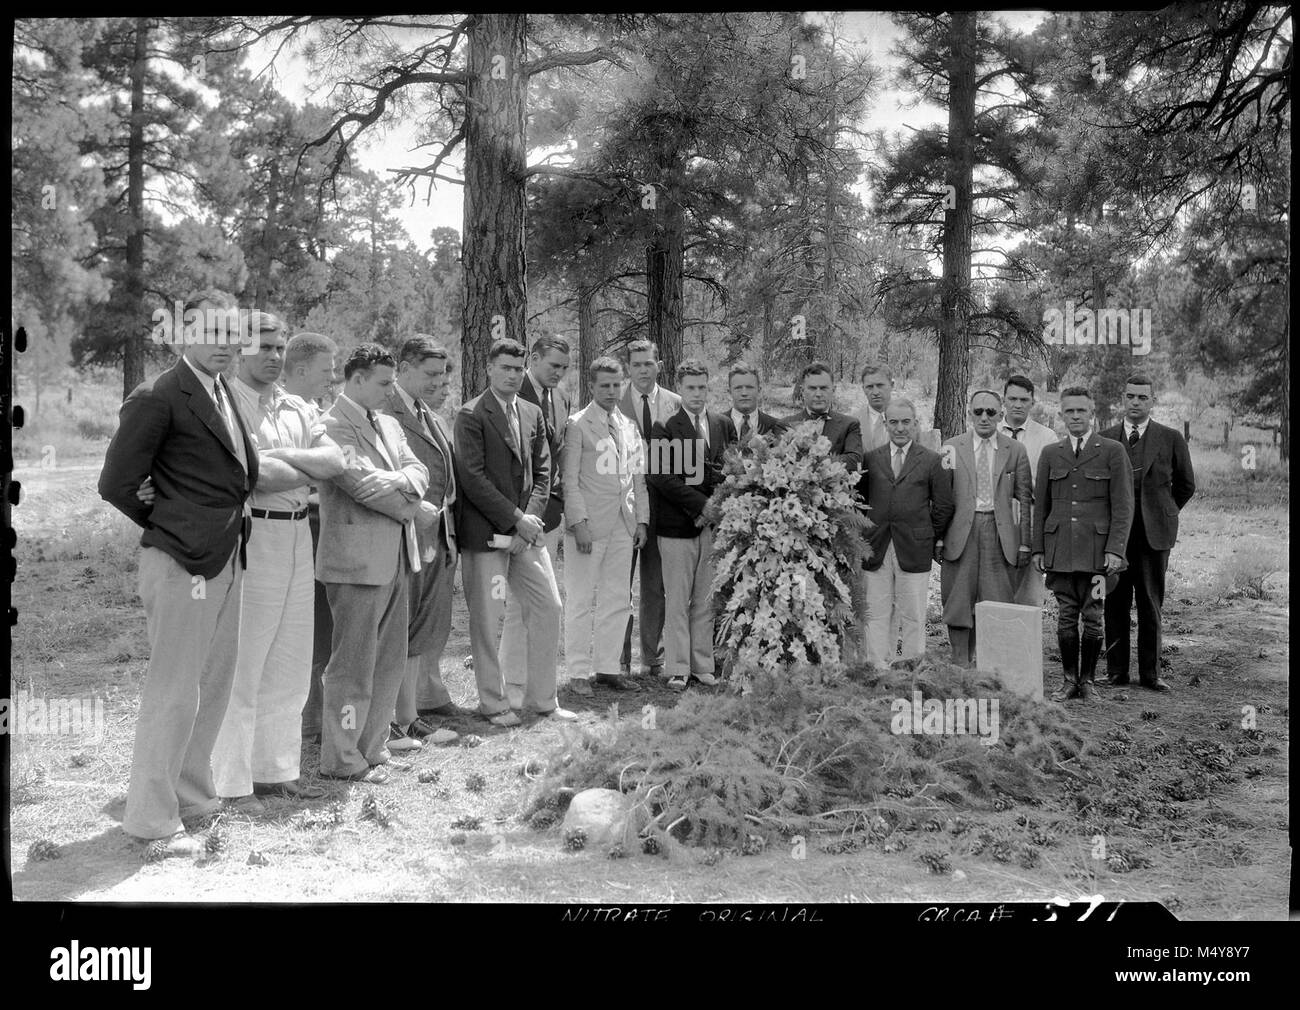 MEMBERS OF THE YALE, HARVARD & PRINCETON FOOTBALL TEAMS (ENROUTE TO THE LOS ANGELES OLYMPIC GAMES) PAY TRIBUTE TO ROBERT BINGHAM, FORMER YALE FOOTBALL PLAYER, & GRCA FOREST RESERVE RANGER. (1919) GRCA CEMETERY. JULY 1932 .  First used before the establishment of the national park but not formally dedicated until 1928, the cemetery serves as a resting place for many early Grand Canyon families and pioneers. The cemetery—part of the Grand Canyon Village National Historic District—has more than 390 individual graves, several of which date back to before the establishment of the park and the dedic Stock Photo